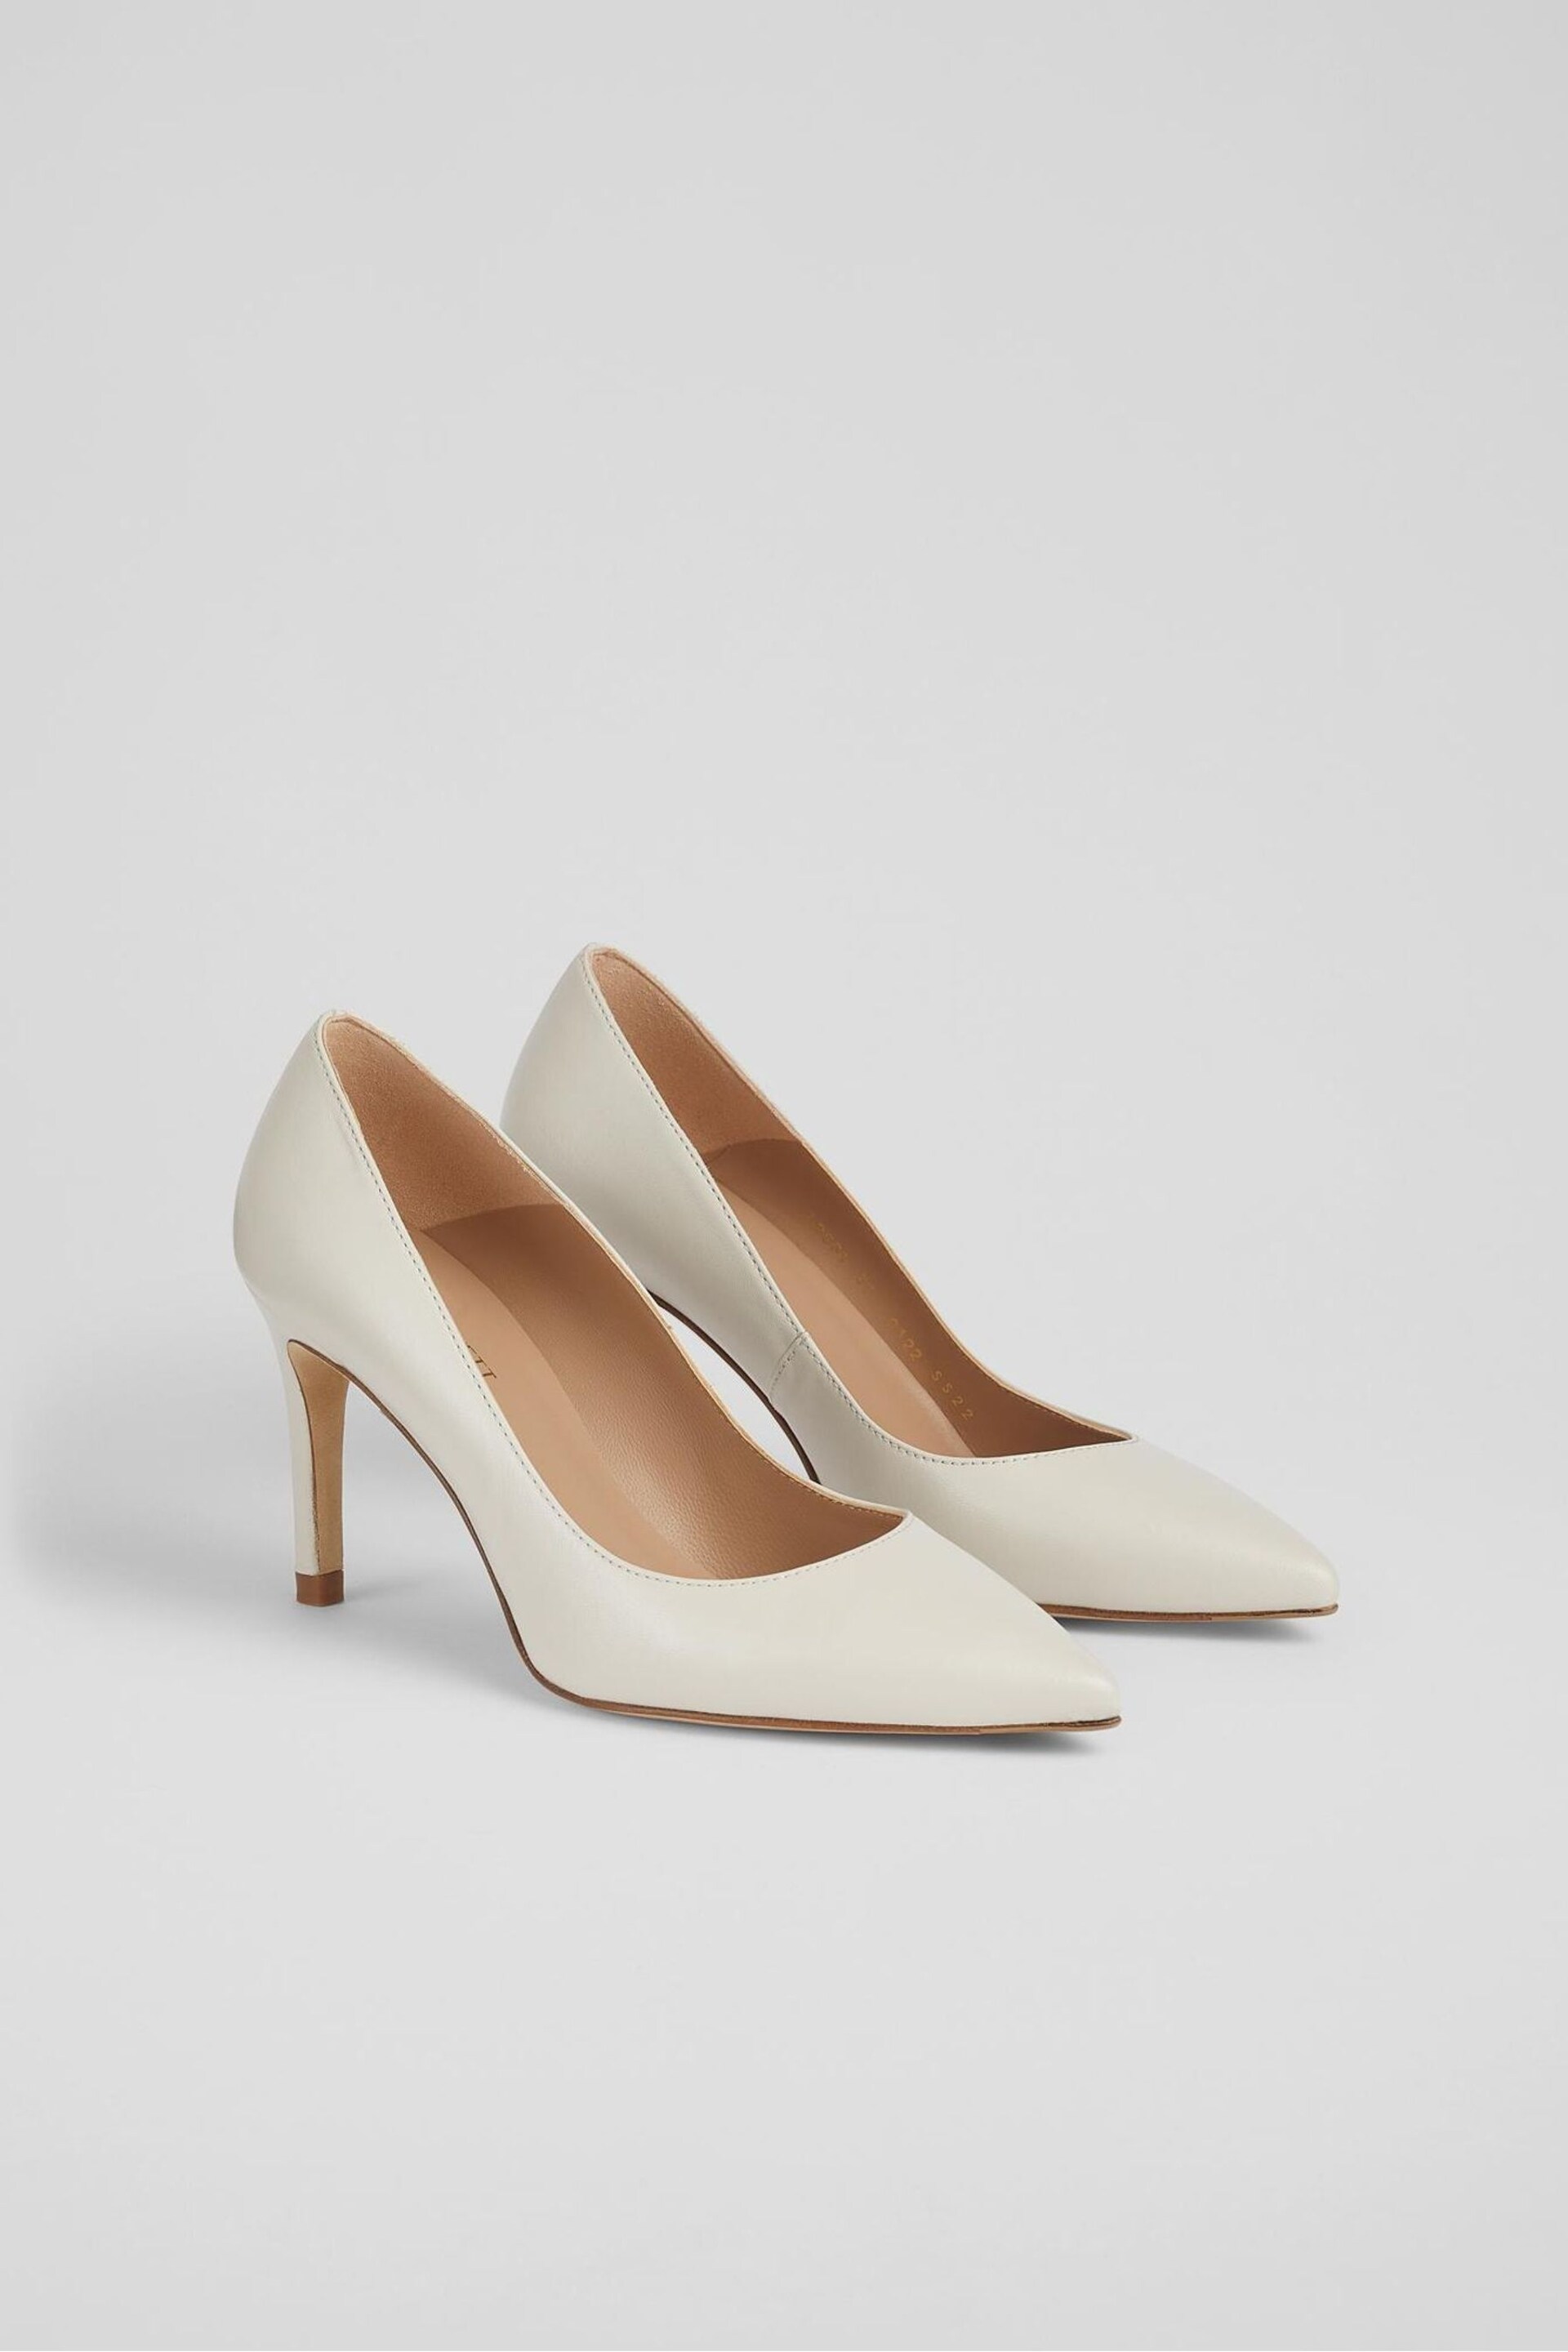 LK Bennett Floret Leather Pointed Court Shoes - Image 2 of 4